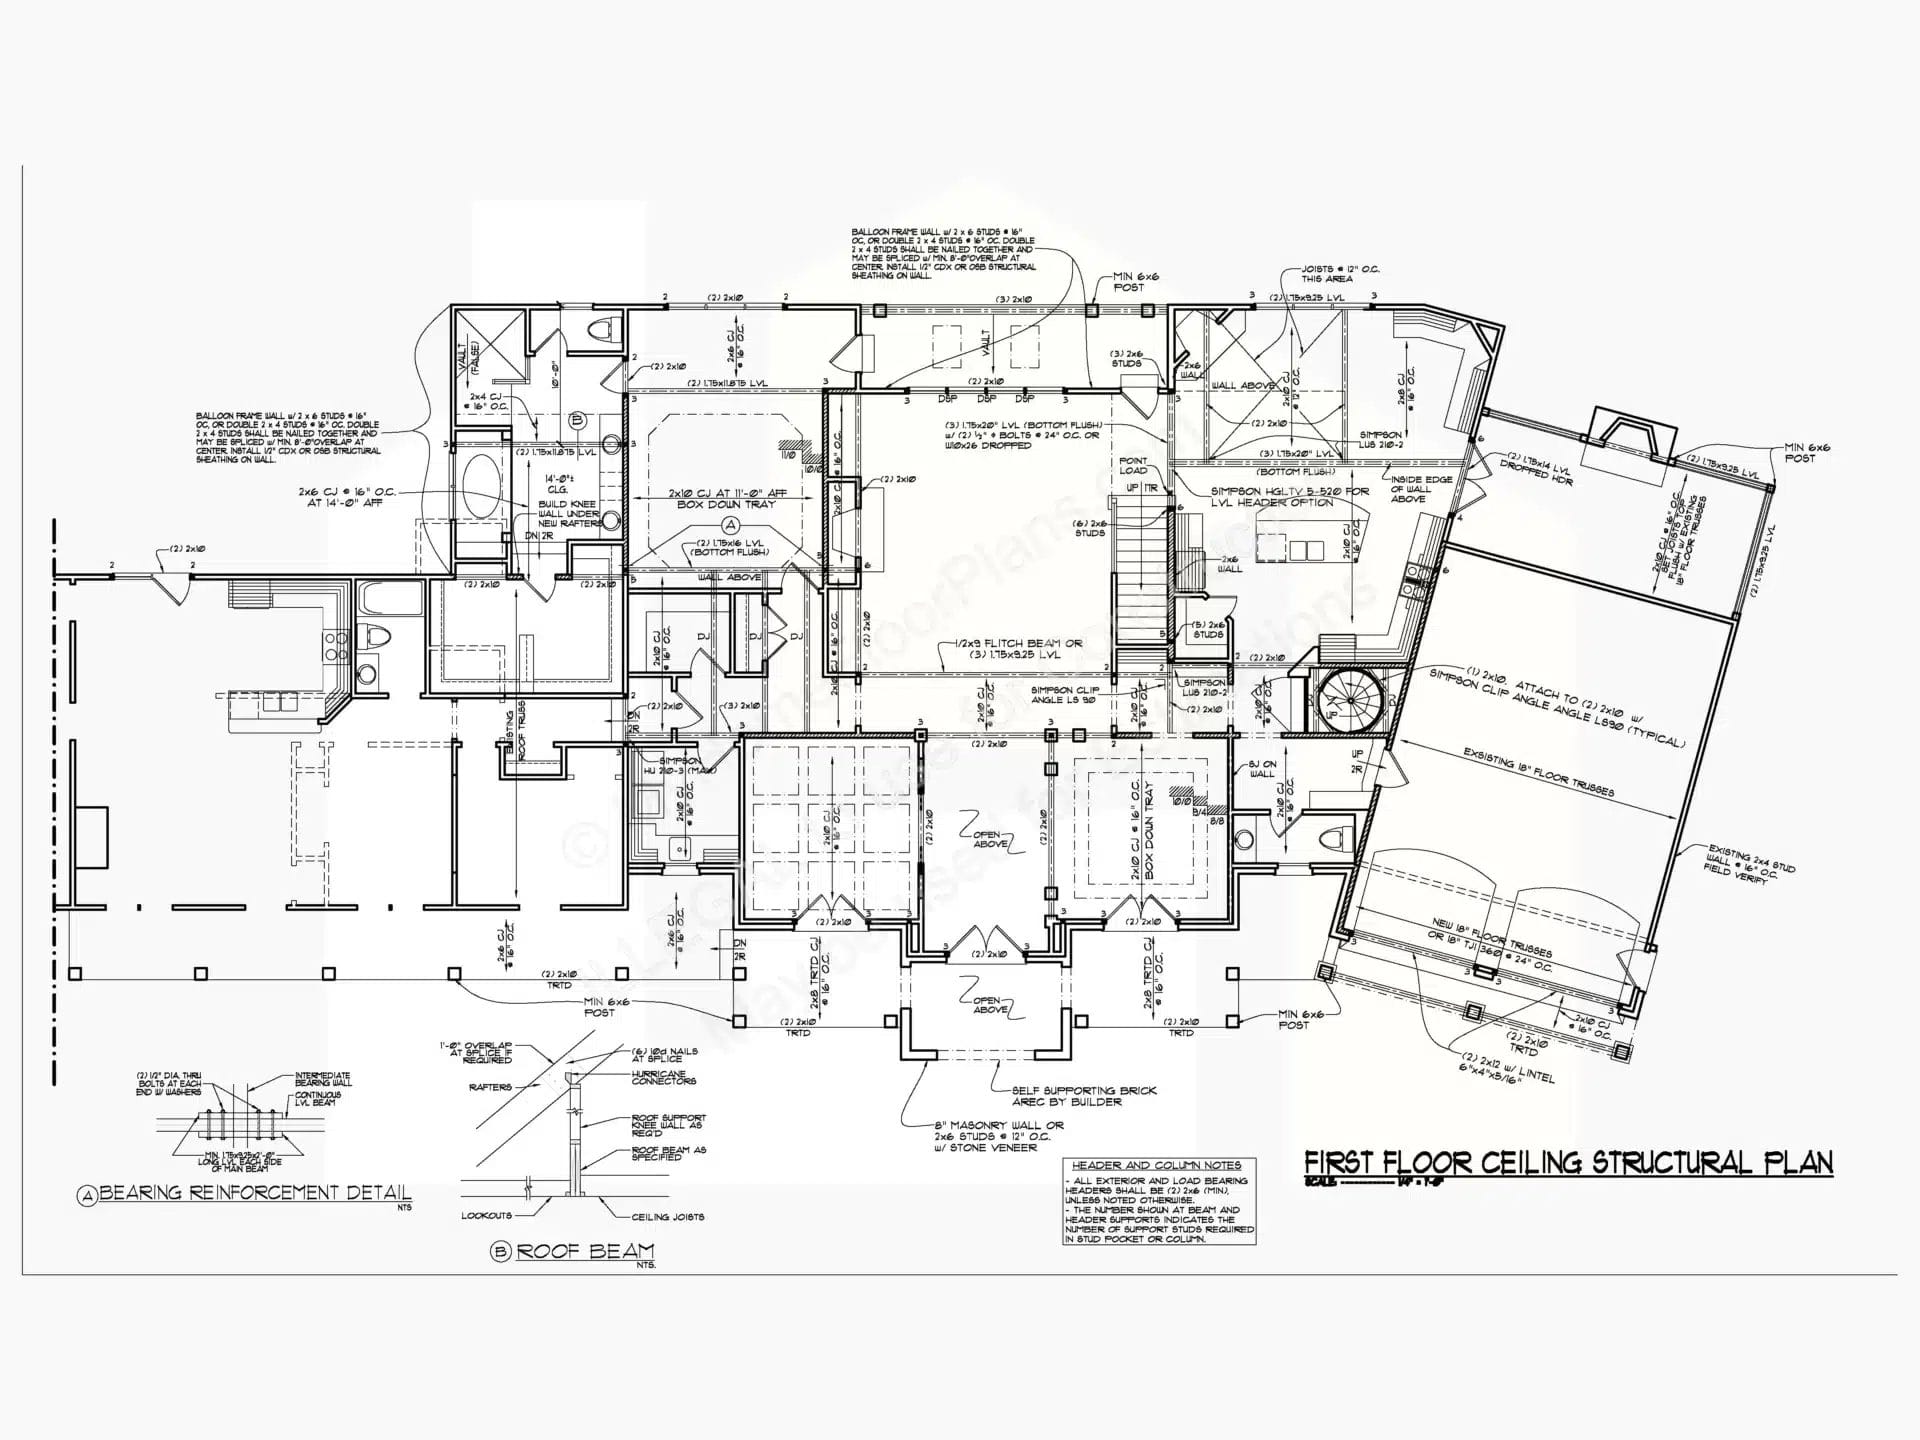 A detailed architectural blueprint of a first floor ceiling structural plan for a home. The 9-1840 displays various technical notations, measurements, room layouts, and beam placements essential for construction purposes.